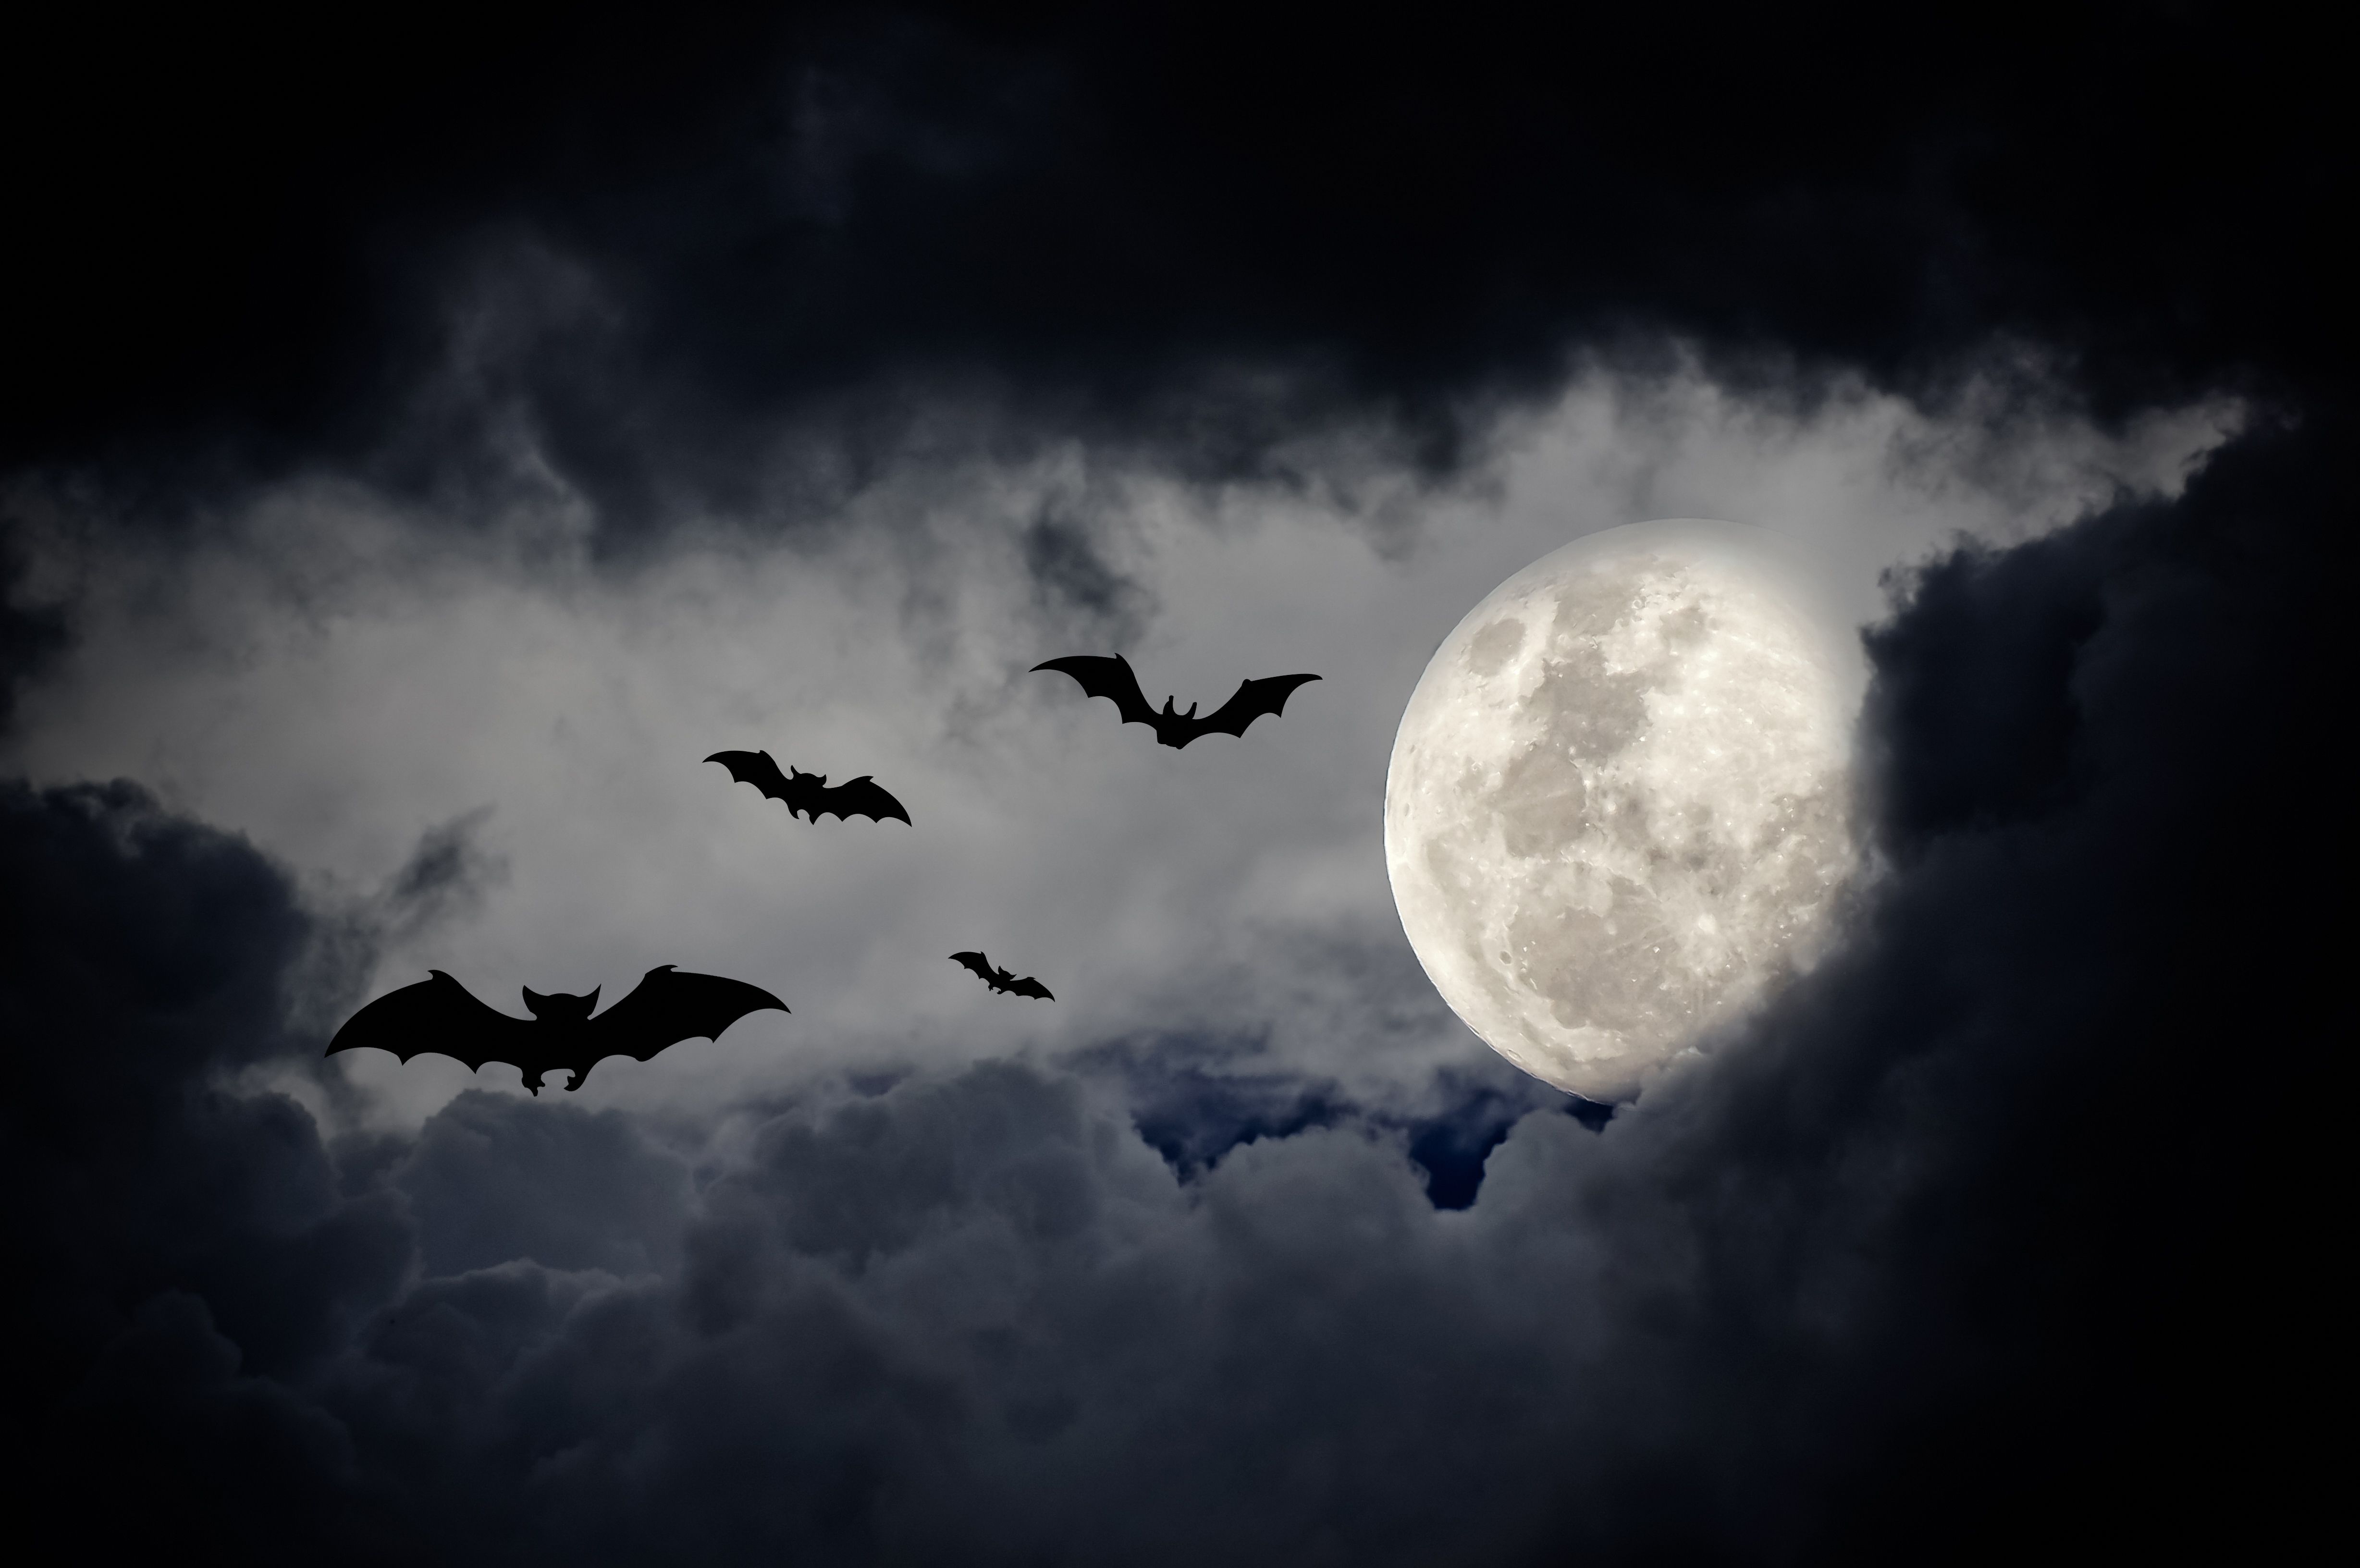 two moon park halloween 2020 37 Best Halloween Quotes 2020 Spooky Sayings To Wish A Happy Halloween two moon park halloween 2020